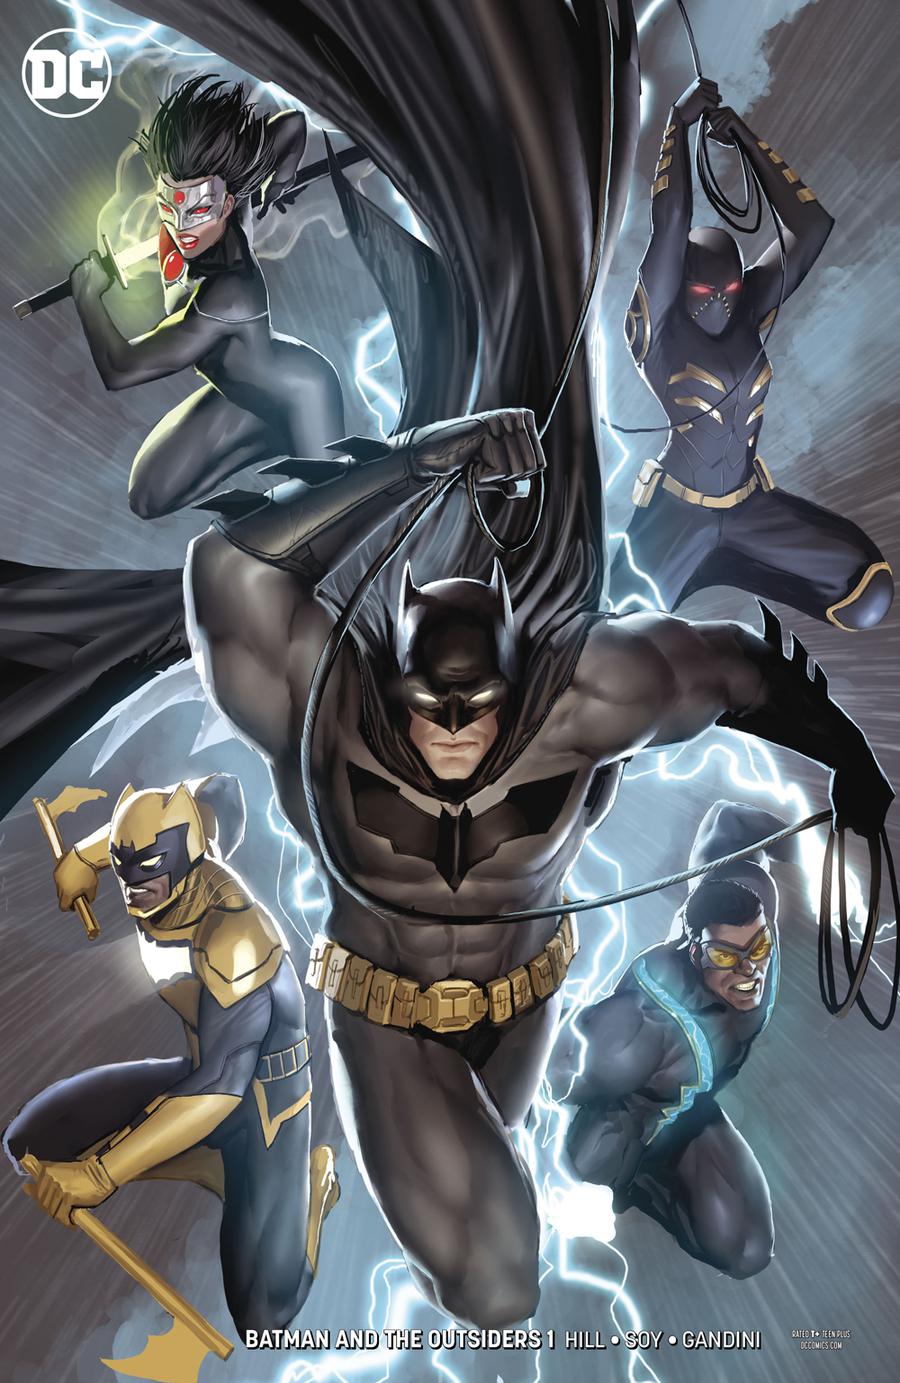 Batman And The Outsiders Vol 3 #1 Cover B Variant Stjepan Sejic Cover